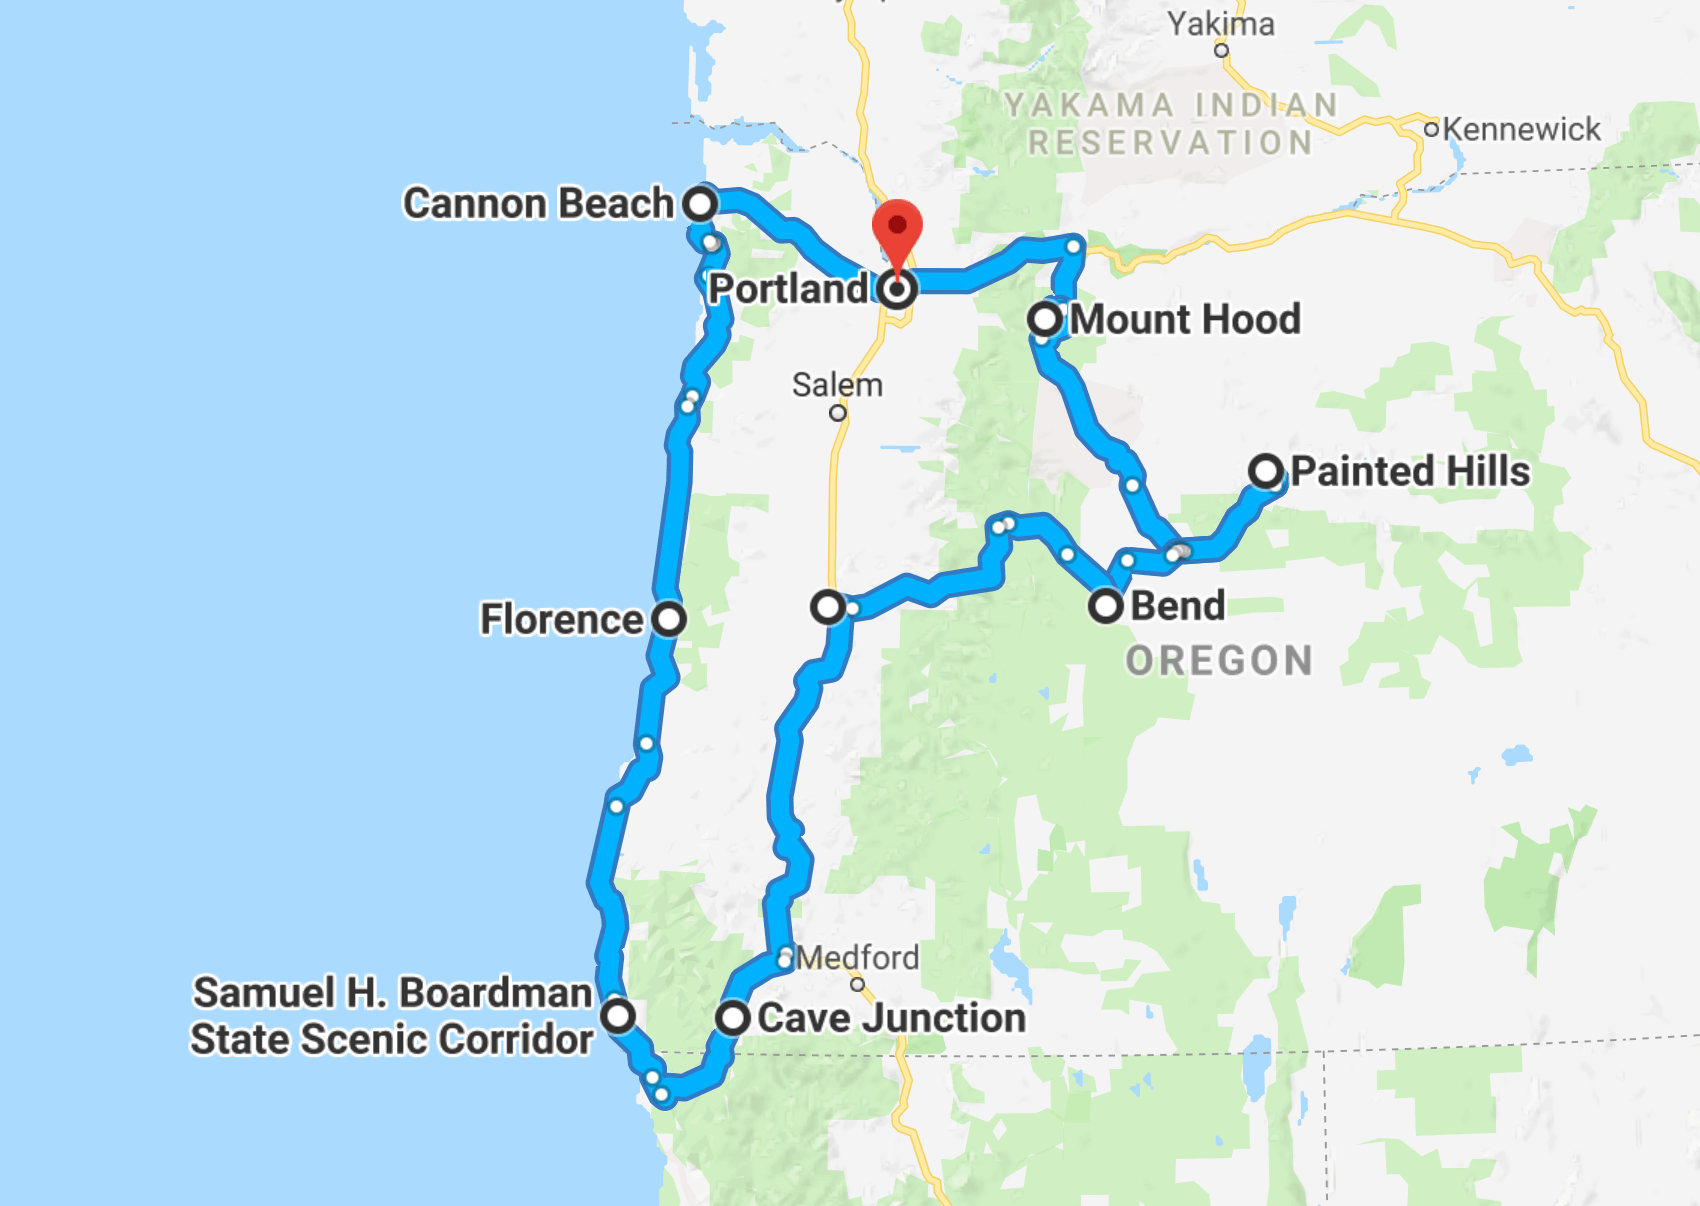 google maps screen shot of a oregon road trip map showing stops including portland, mount hood, cannon beach and more